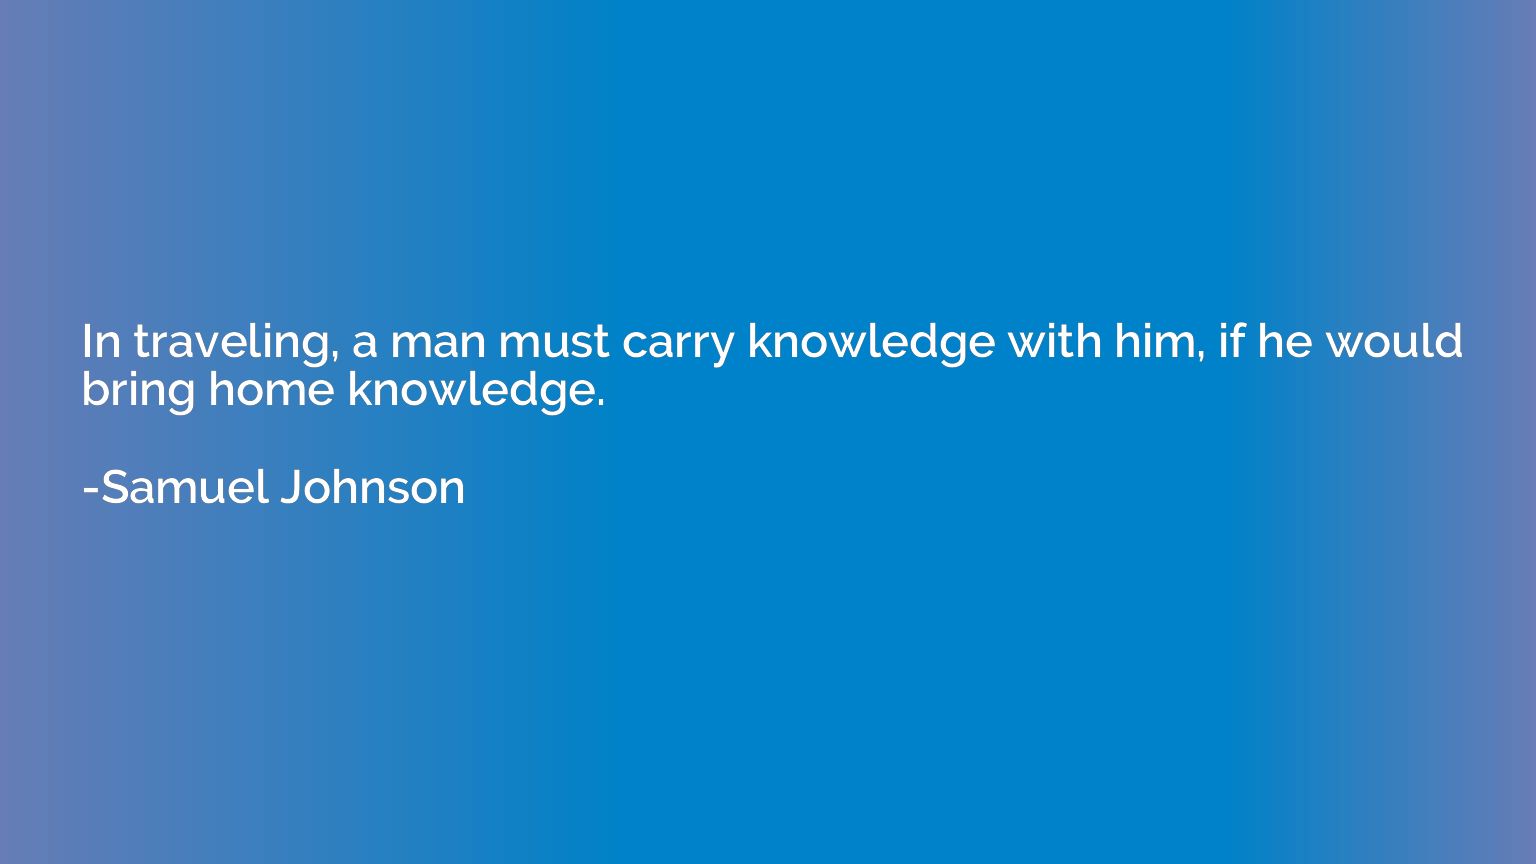 In traveling, a man must carry knowledge with him, if he wou